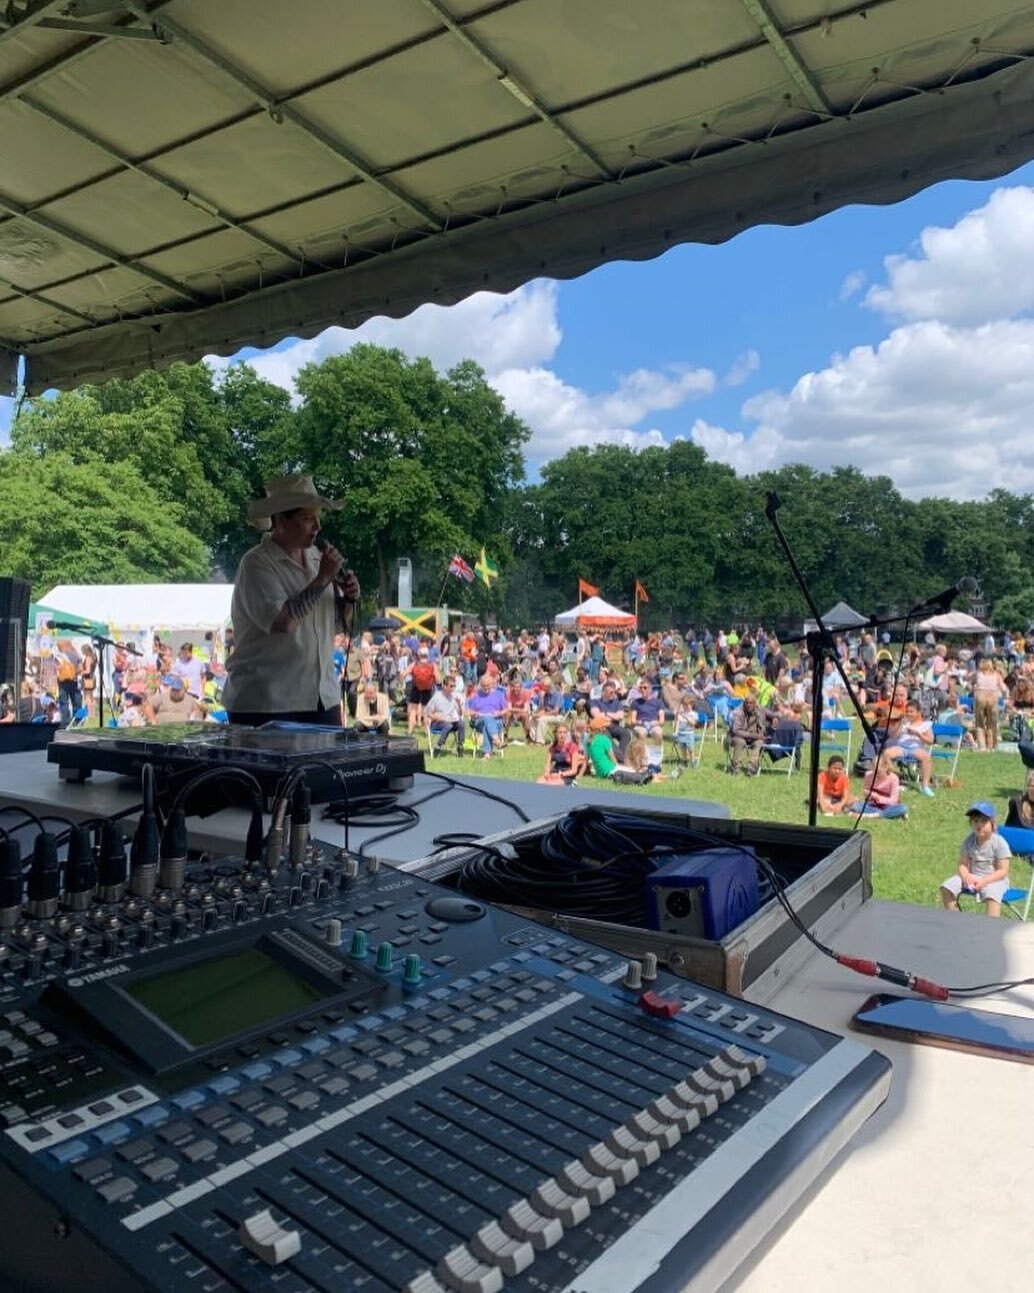 #wellstreetcommonfestival picture from audio engineer @gabriel_fraser_steele